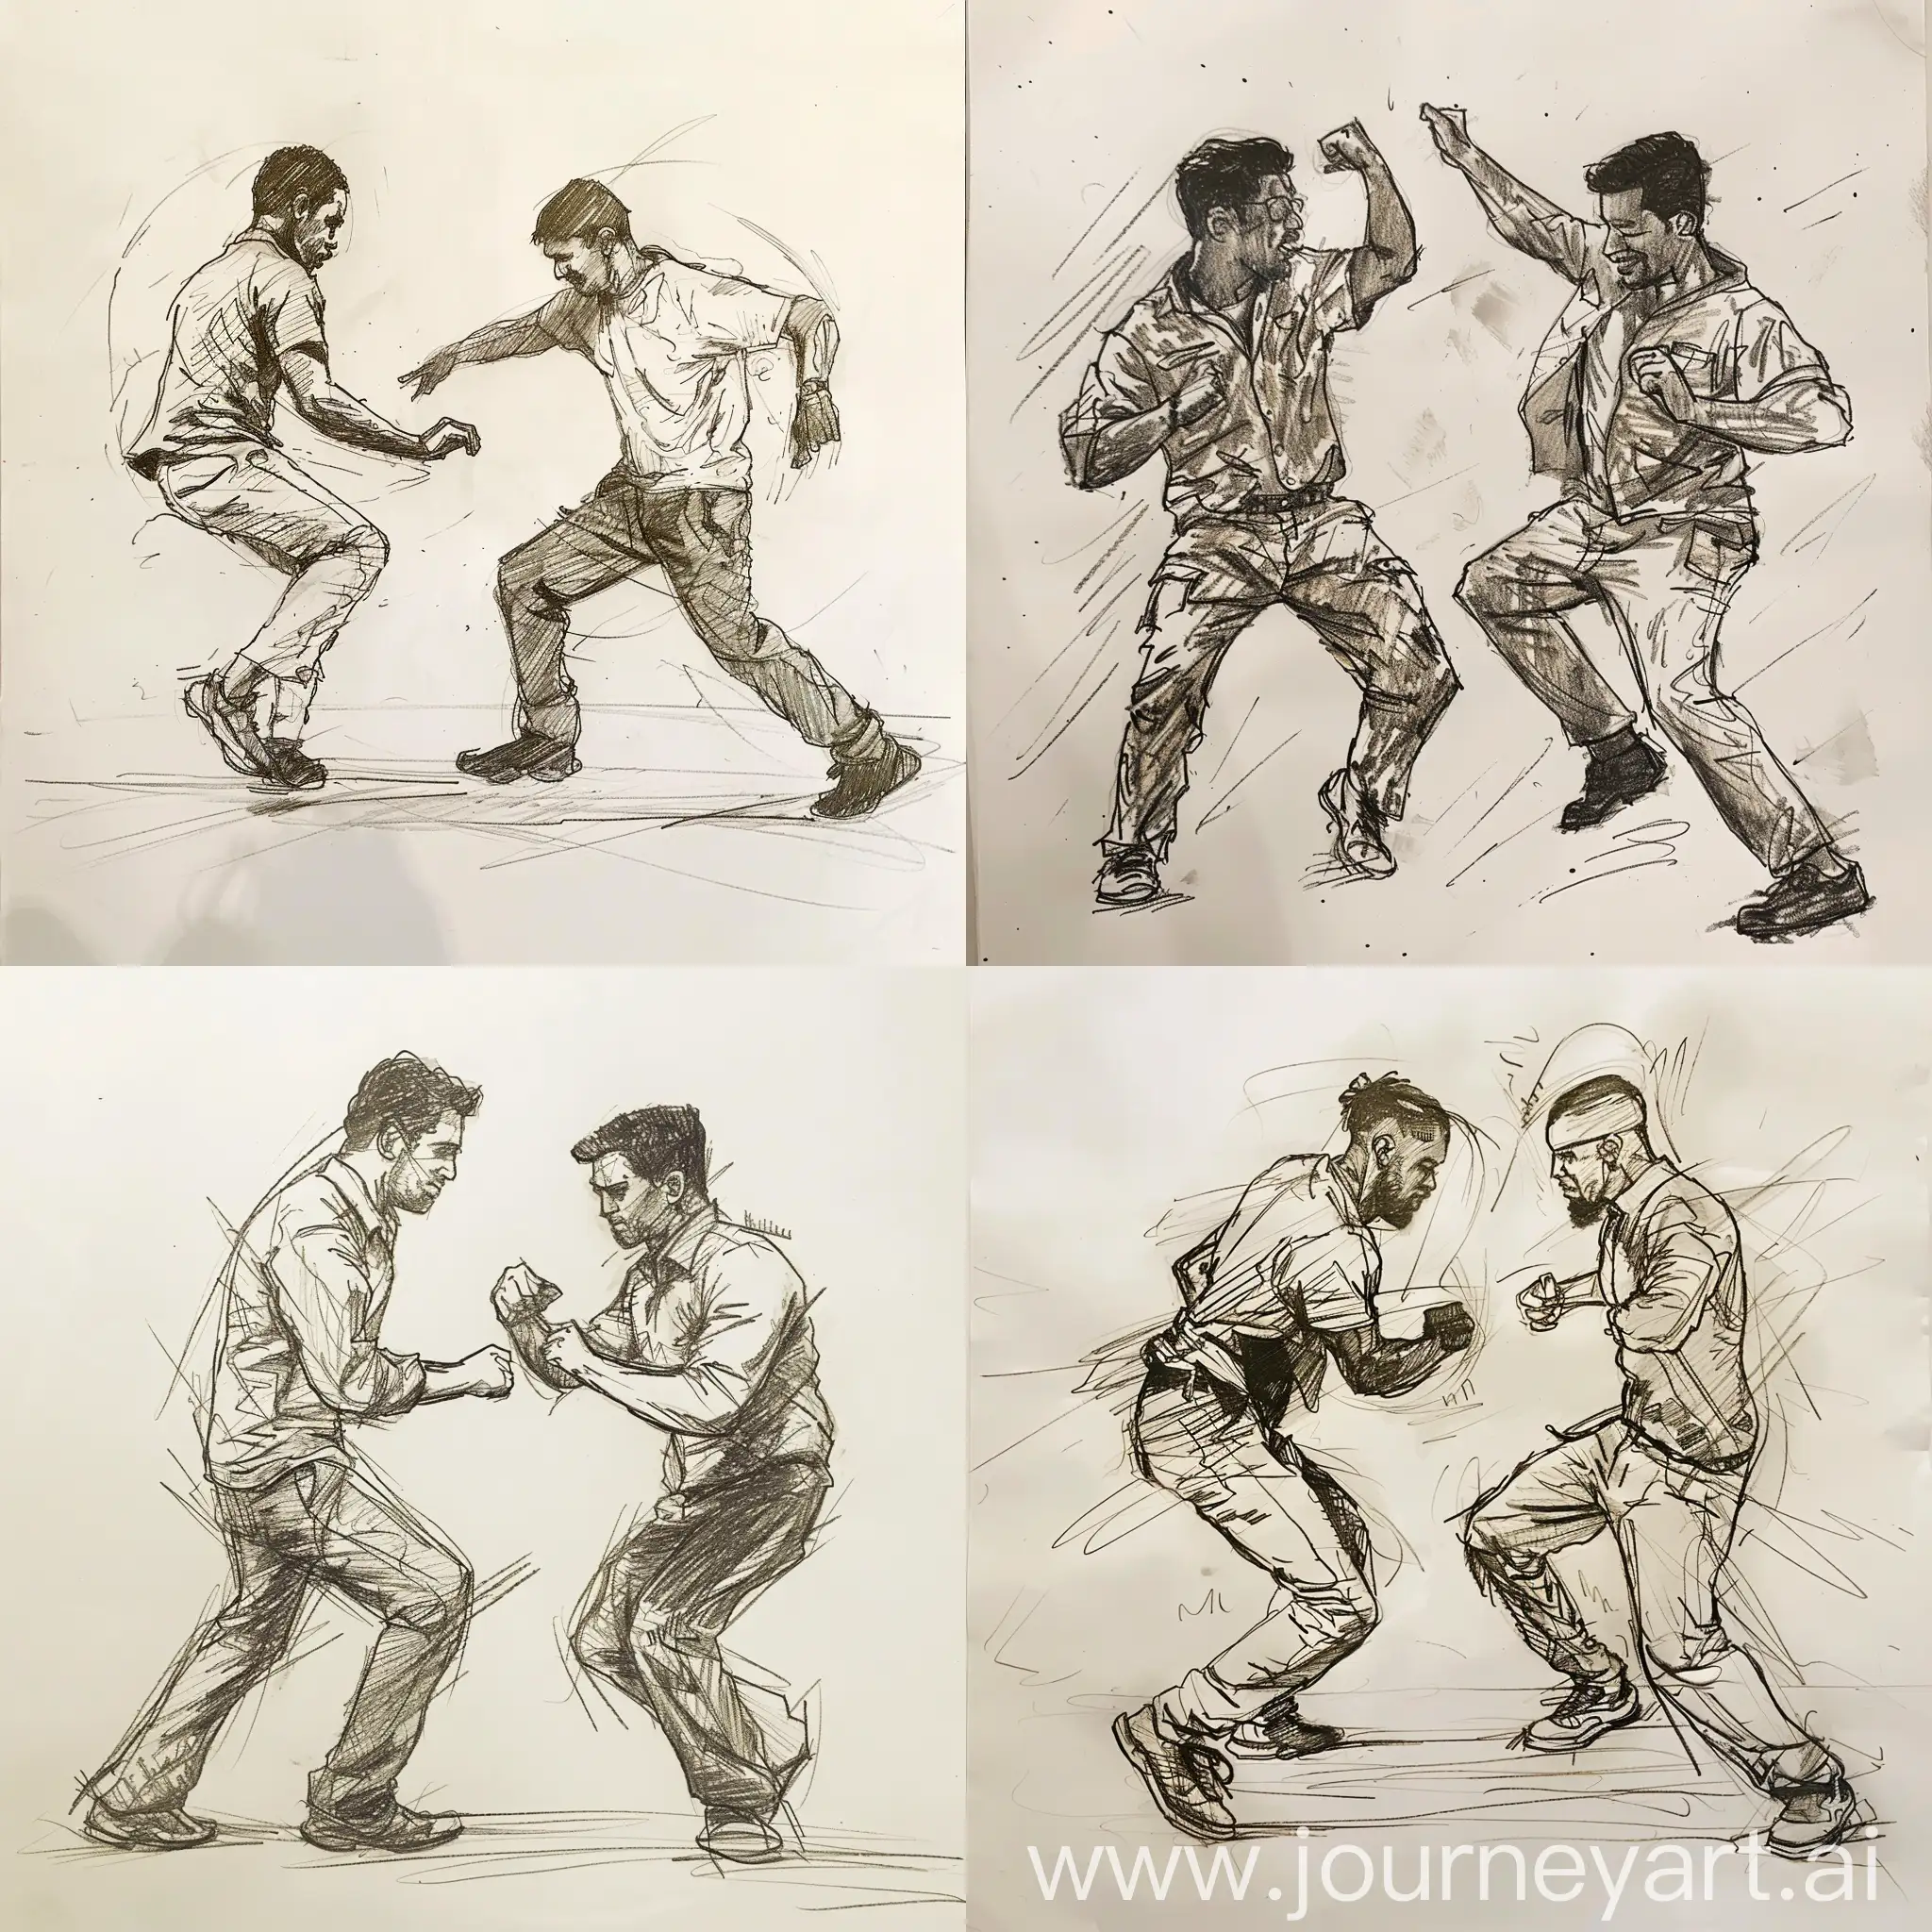 Draw two men participating in a bachata dance battle